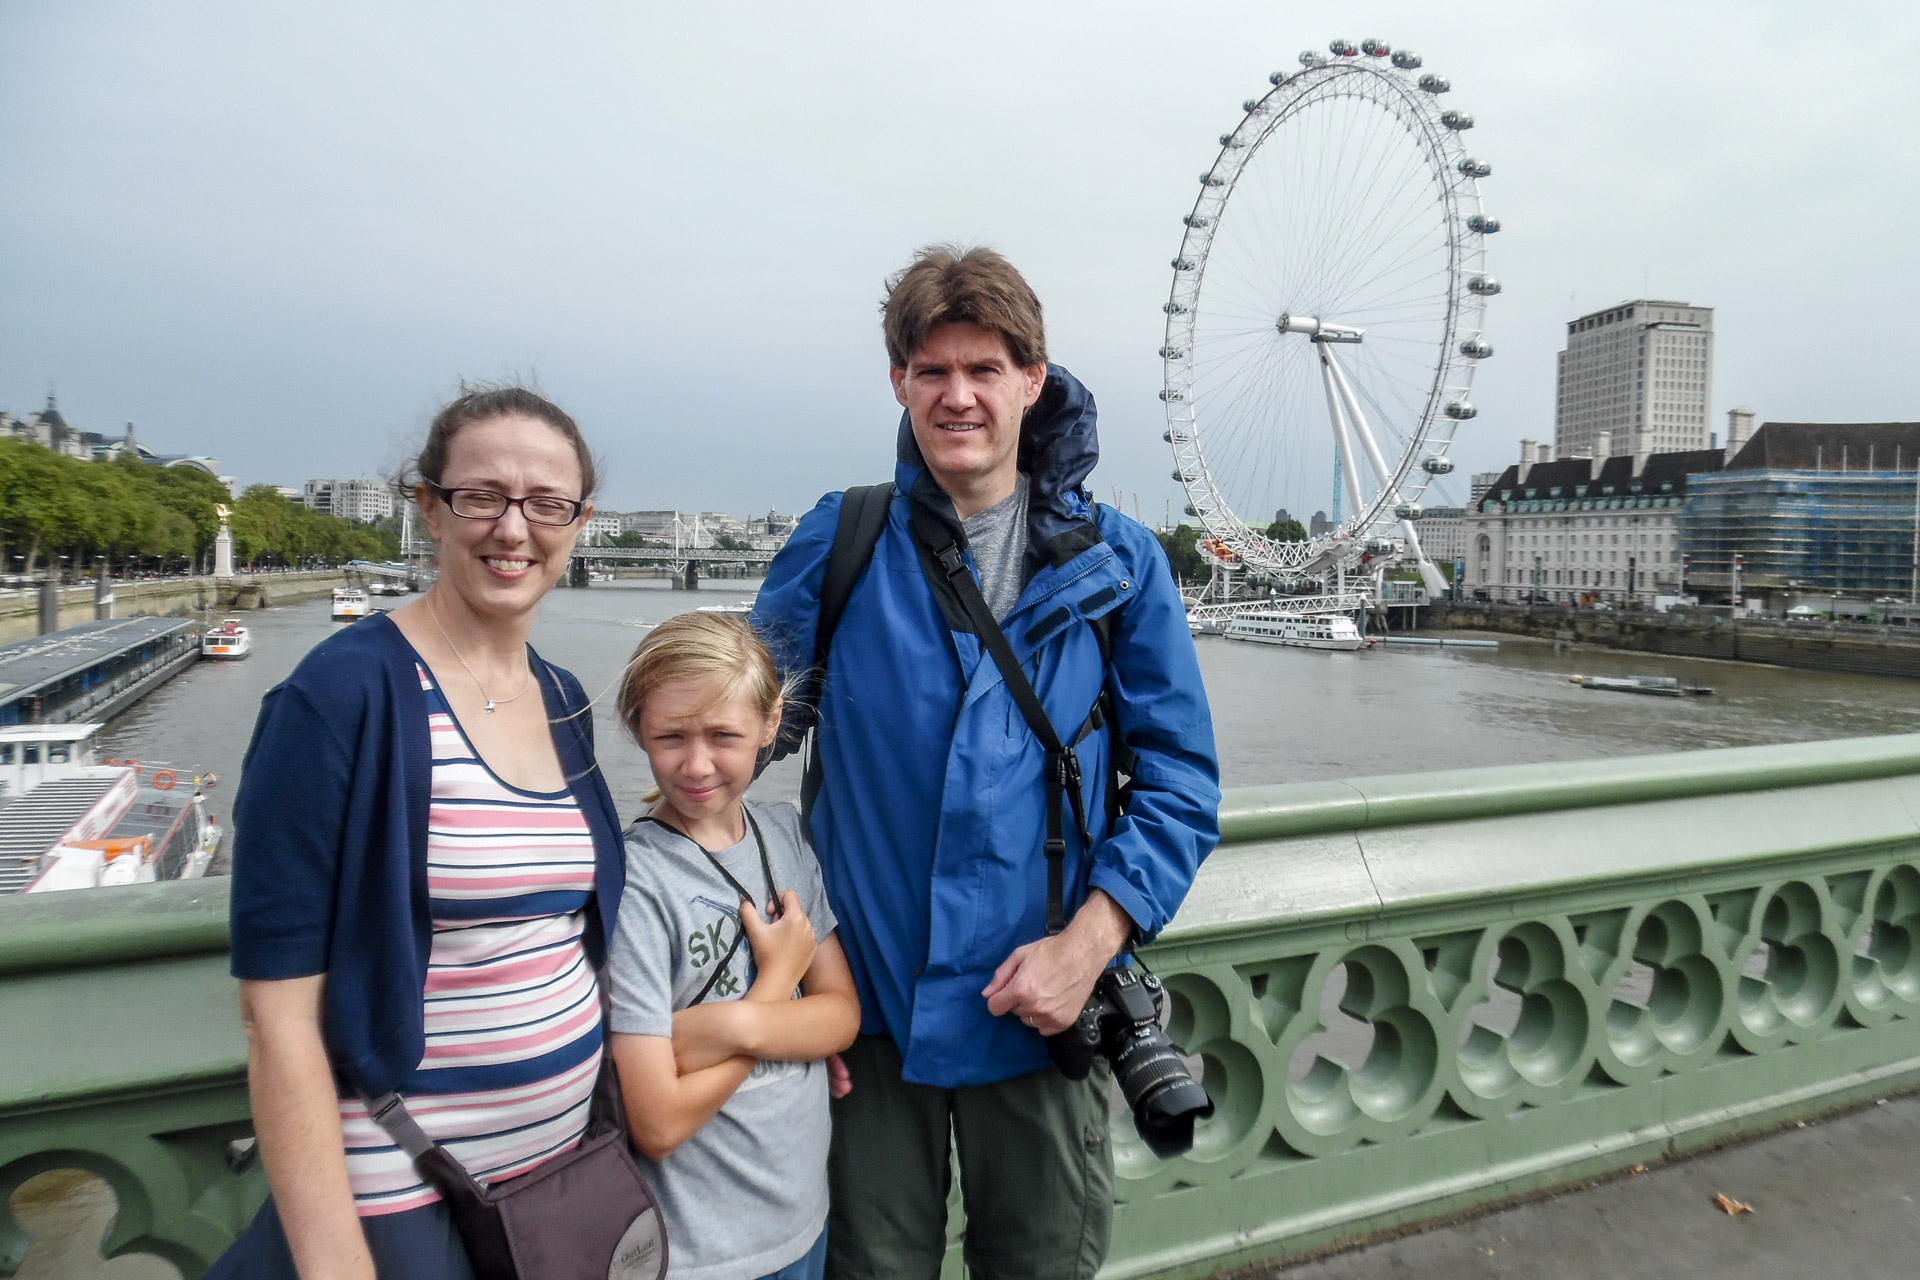 Suzanne, Kyle, and Paul with London Eye